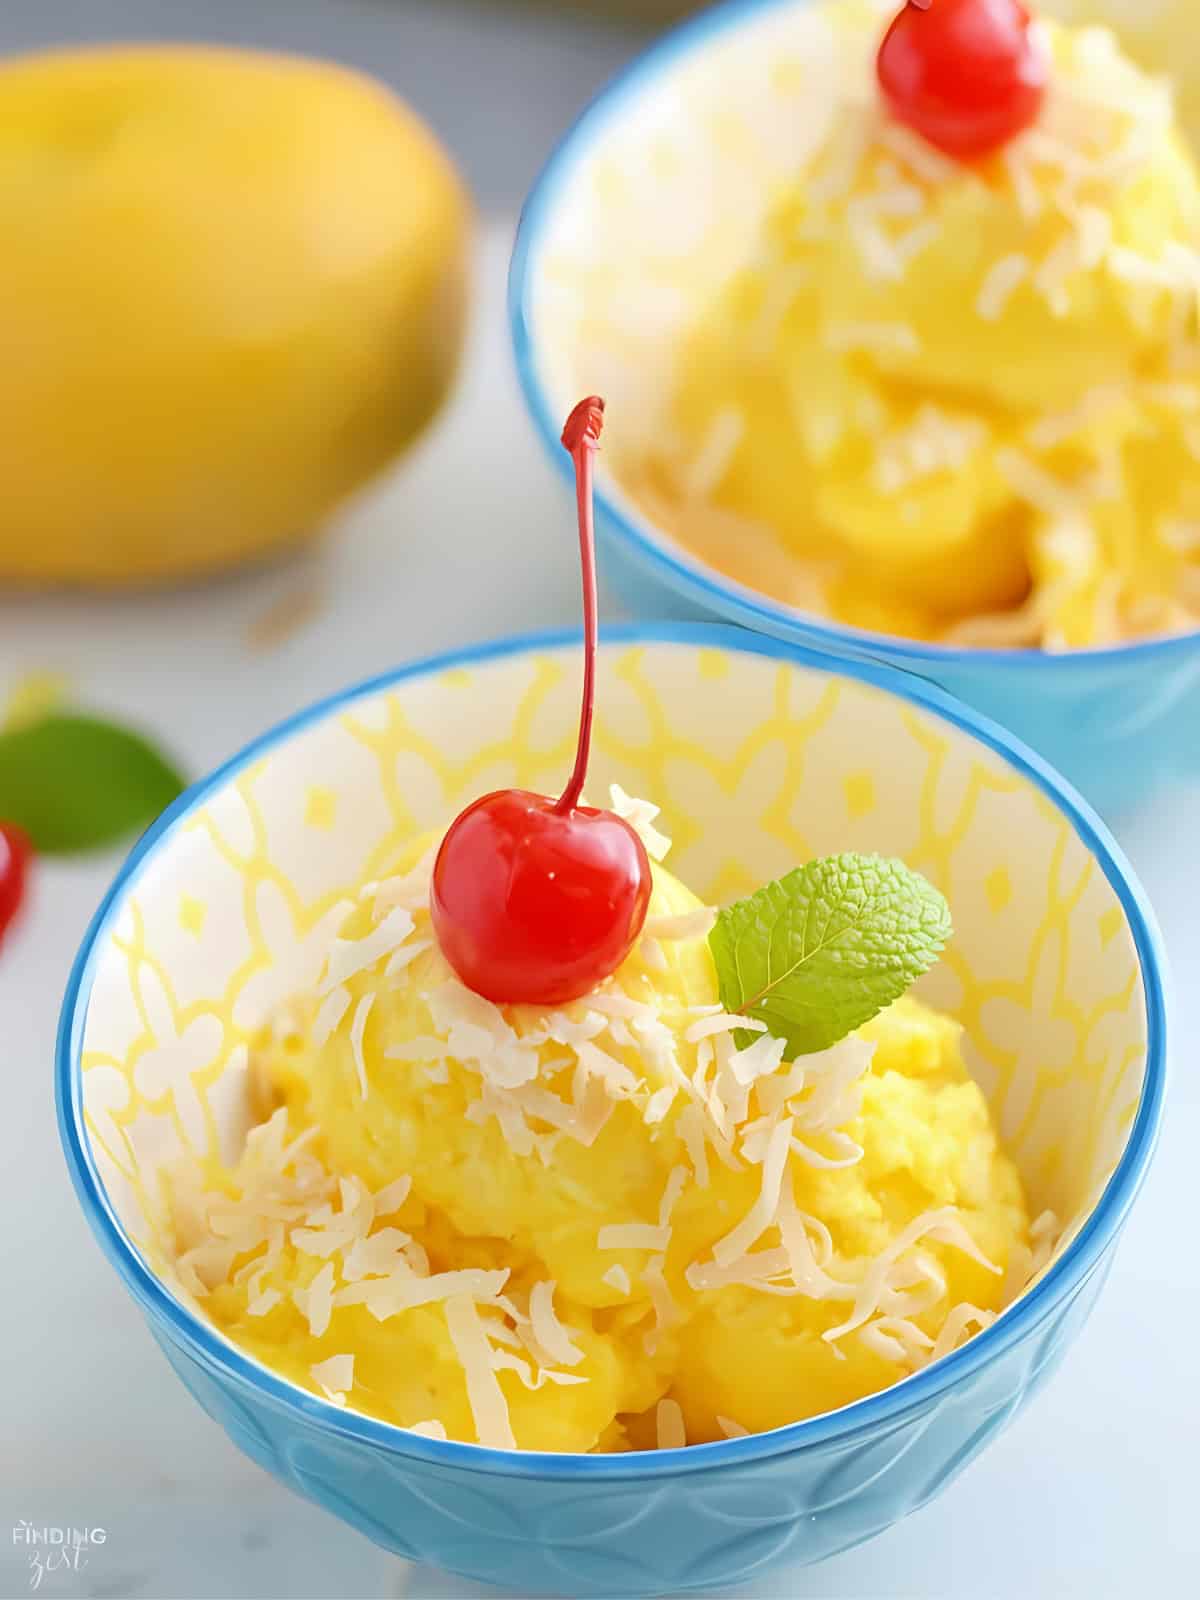 Servings of Mango Pineapple Sorbet with fresh cherry and herb on top.